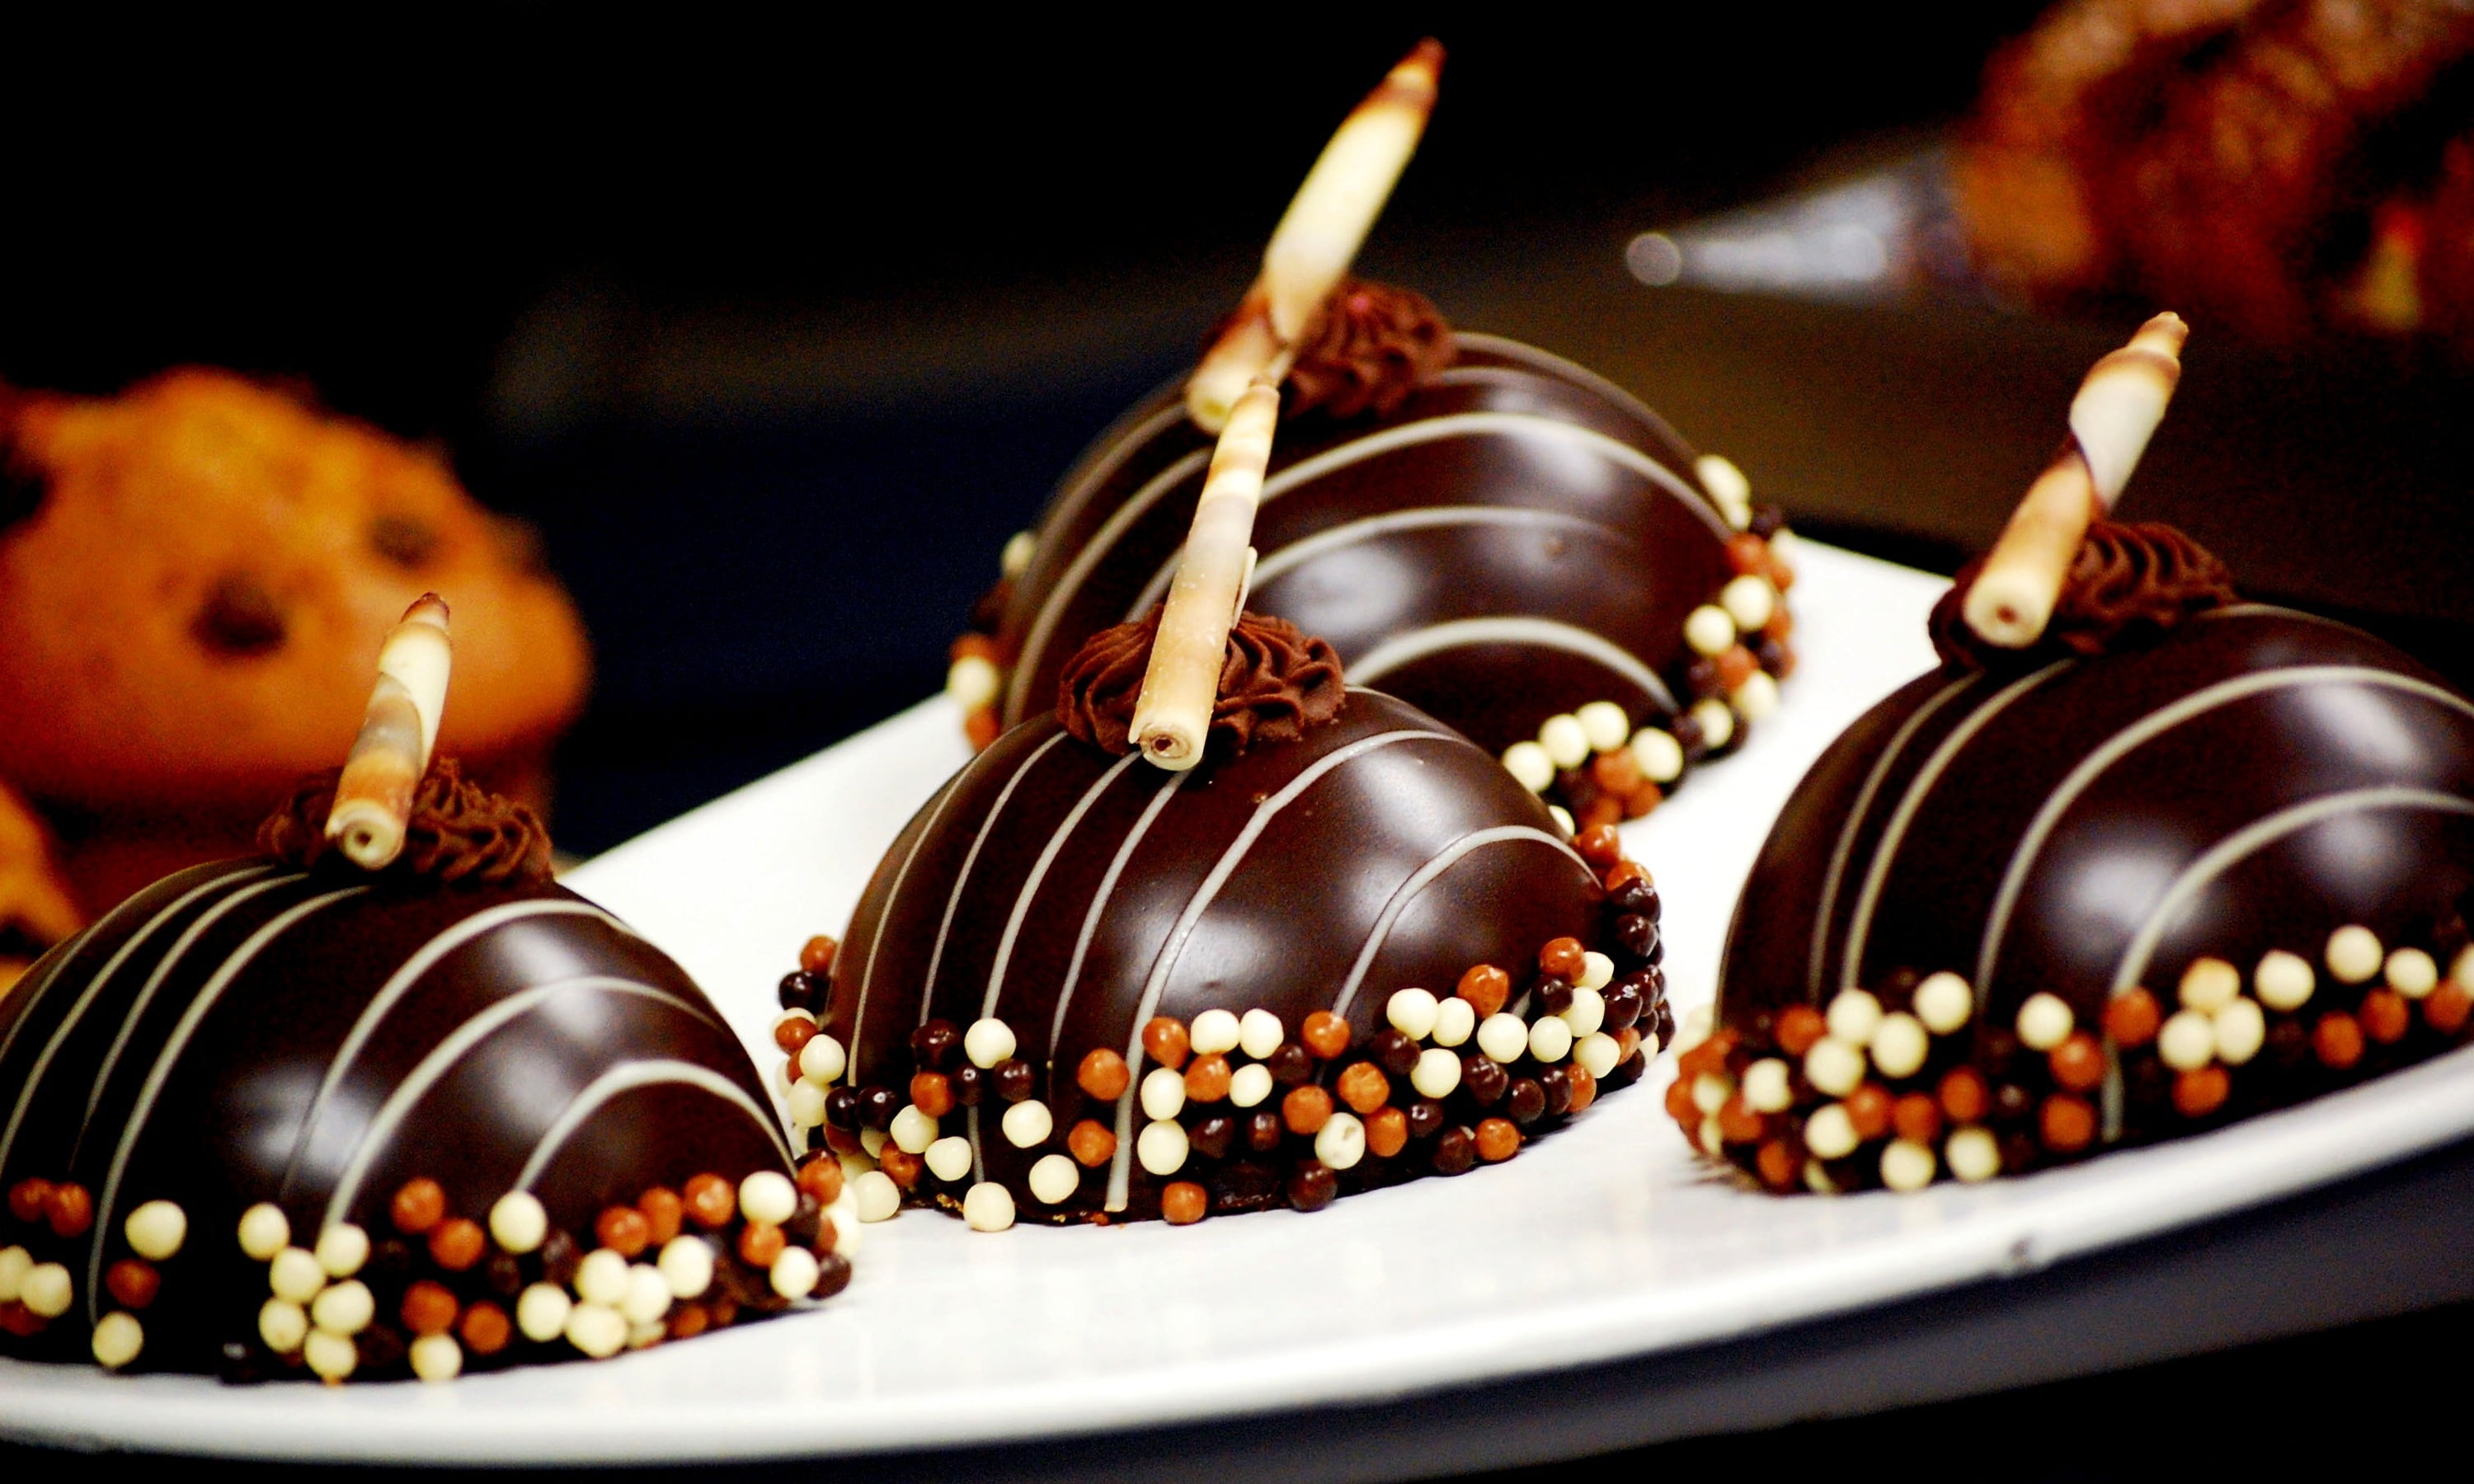 chocolate coated dessert with sprinkles and wafer sticks, candies